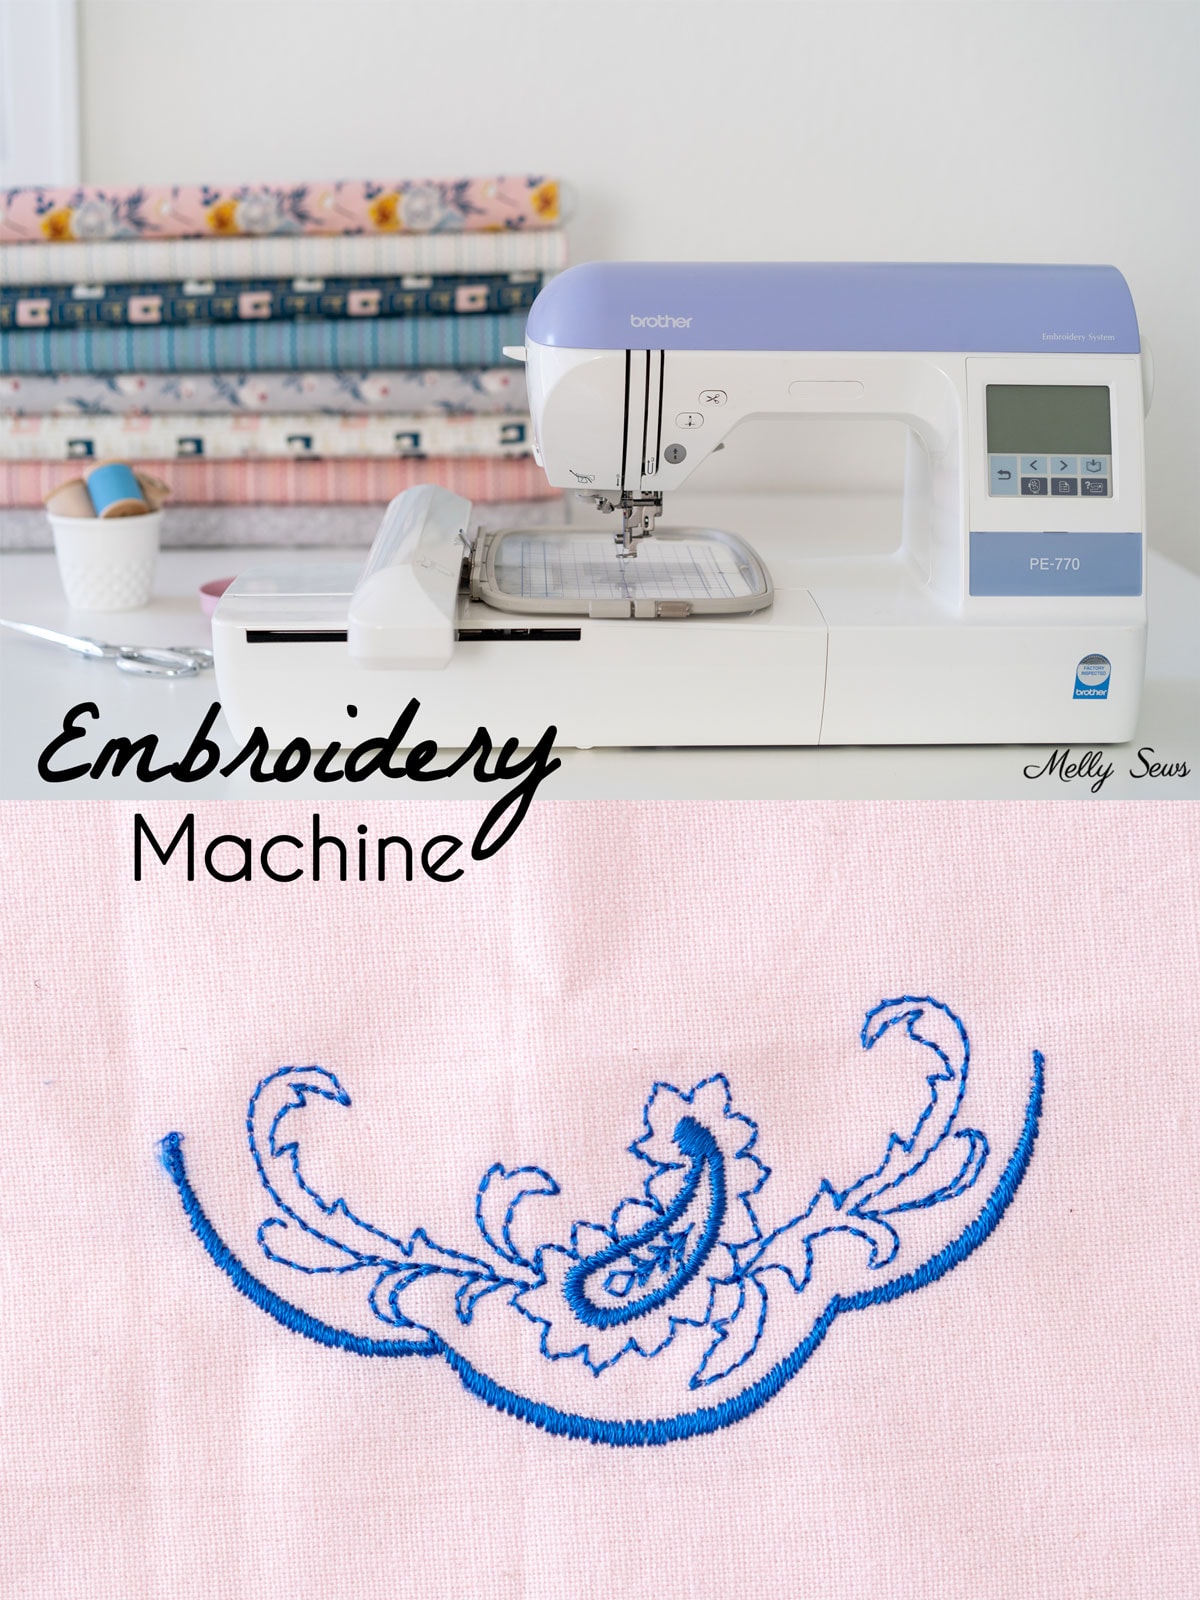 Embroidery machine and example of a machine stitched embroider design